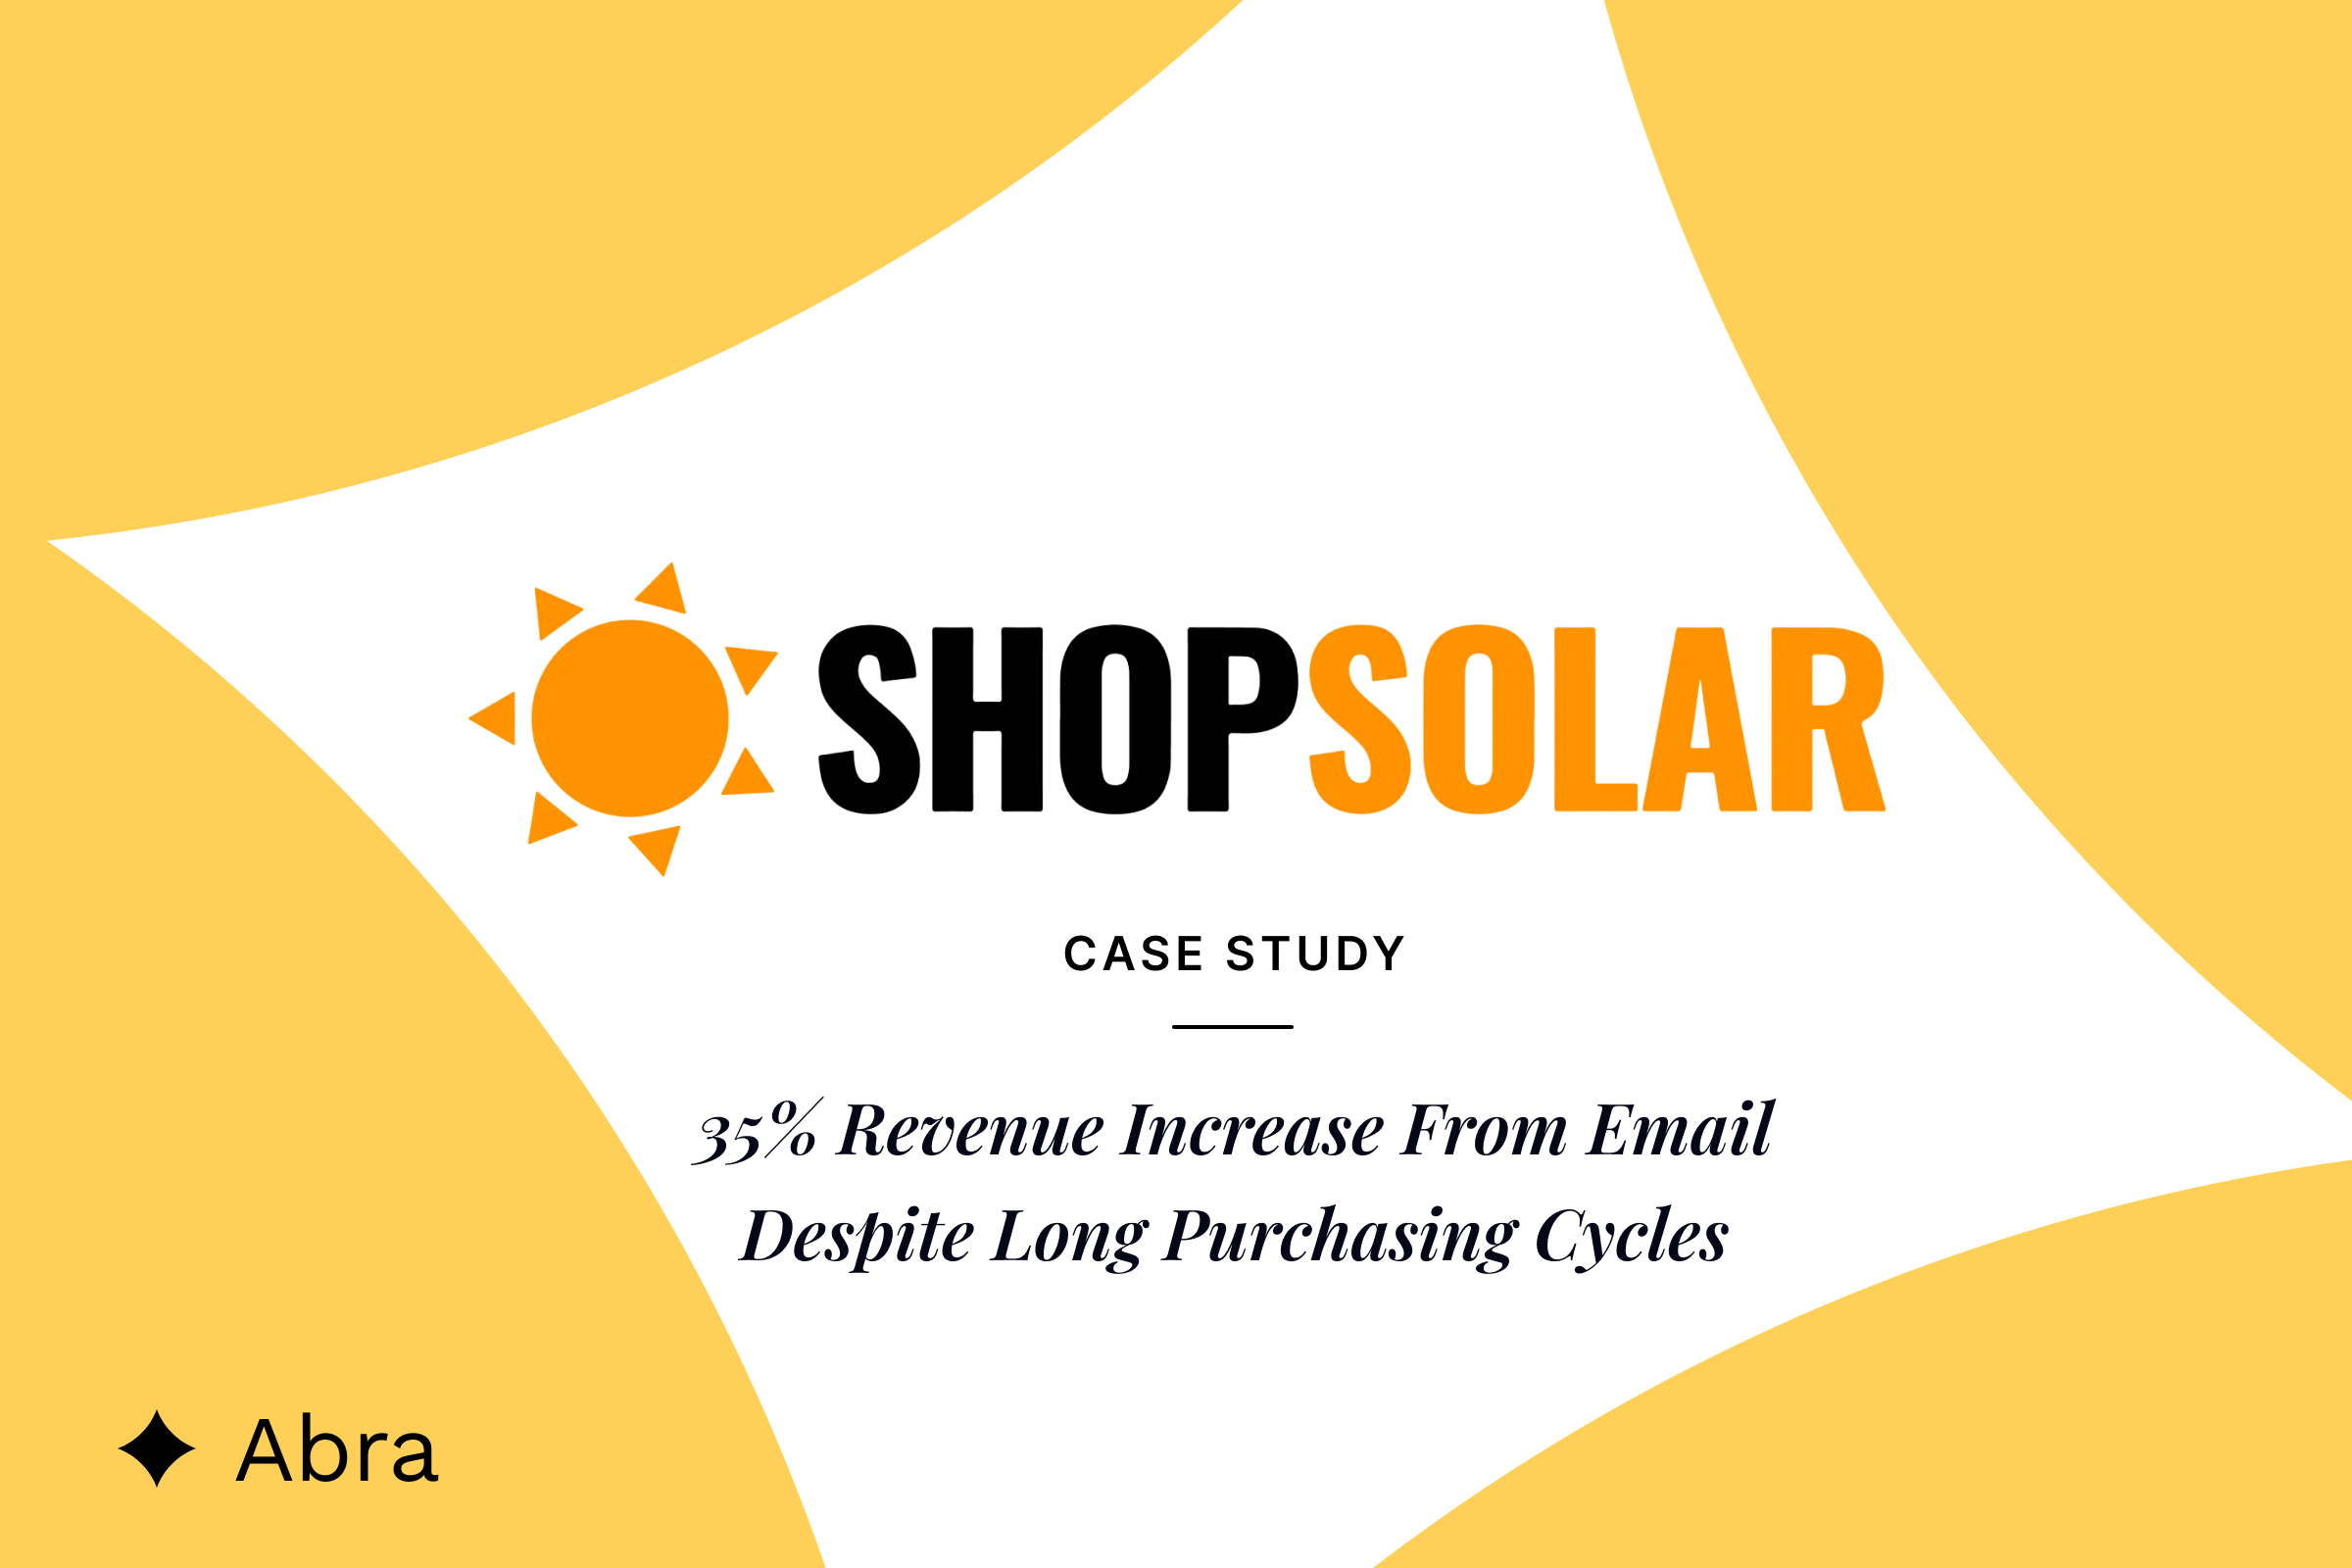 How Shop Solar Achieved a 35% Revenue Increase From Email and Won Over Long Purchasing Cycles